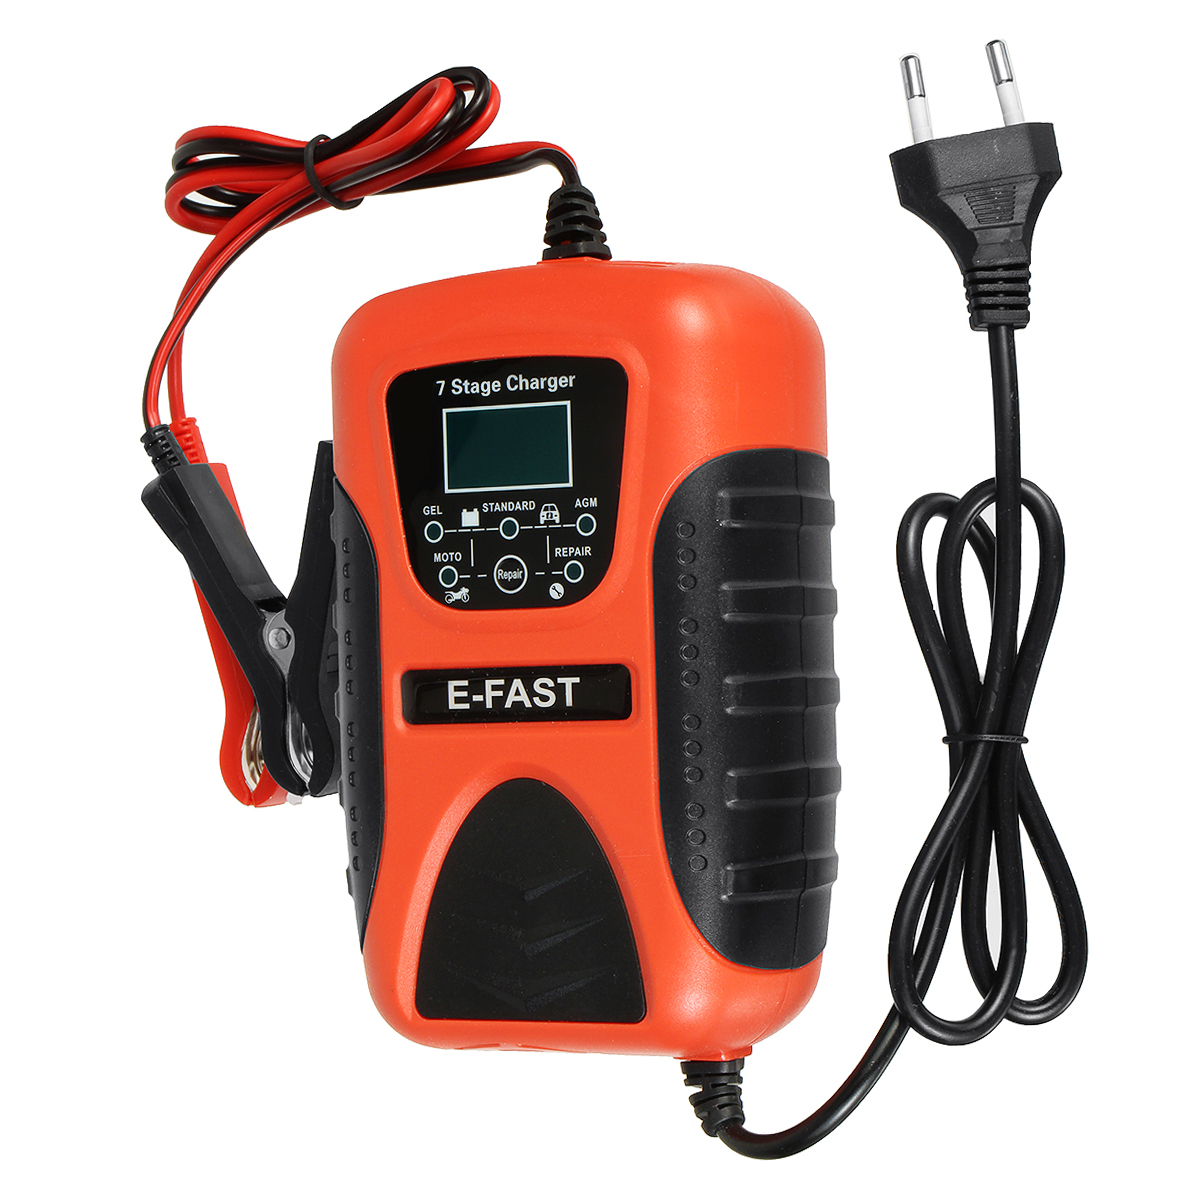 E-FAST 12V 7A Pulse Repair LCD Battery Charger for Car Motorcycle Lead Acid Battery Agm Gel Wet